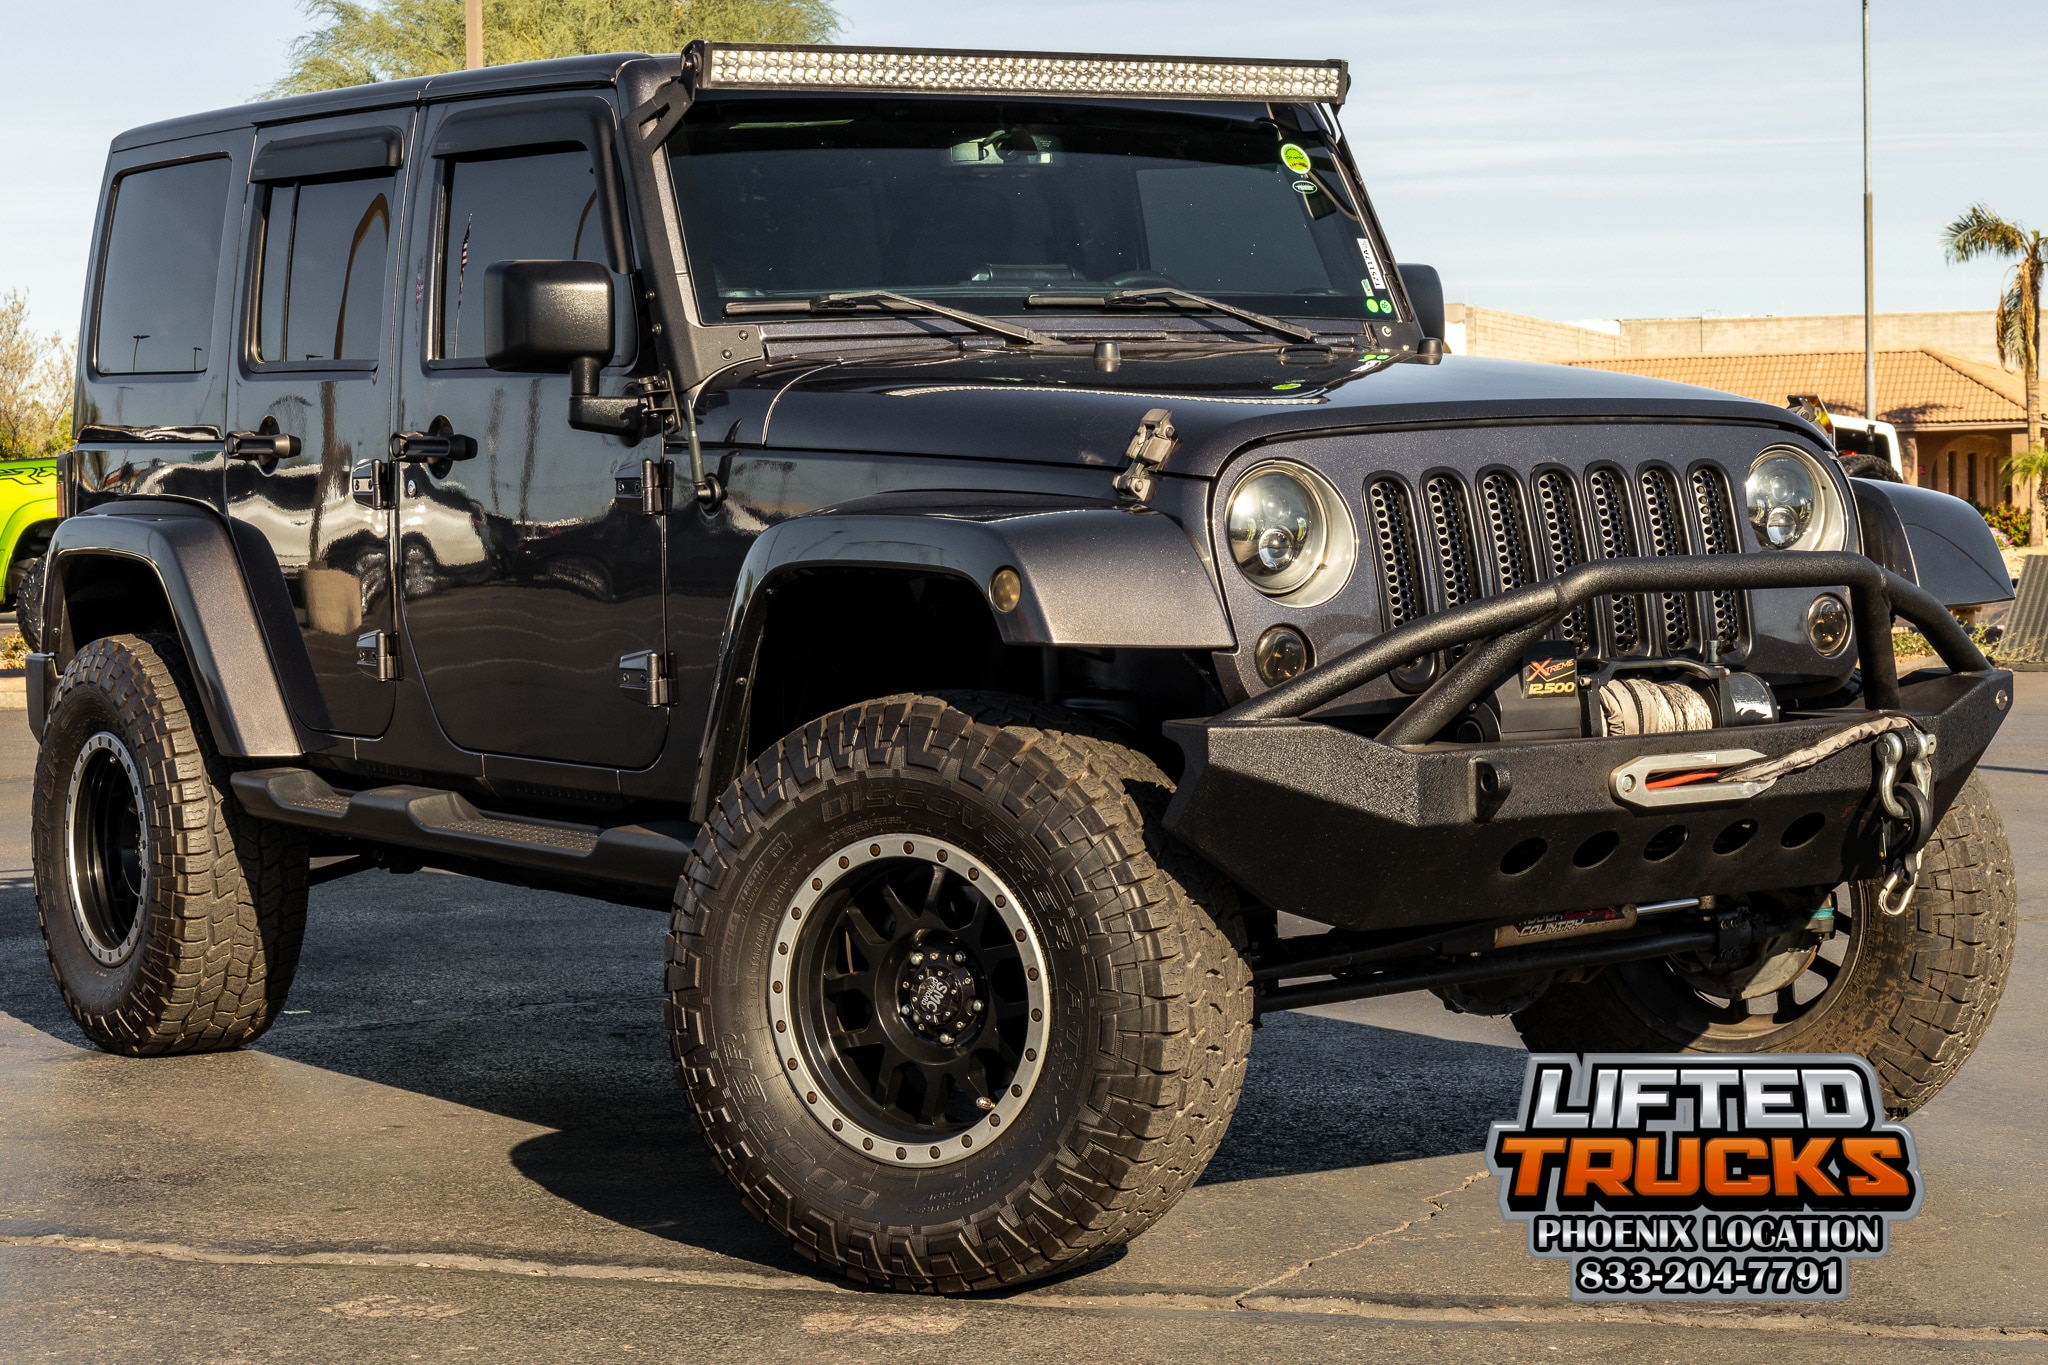 Used 2016 Jeep Wrangler For Sale at Lifted Trucks